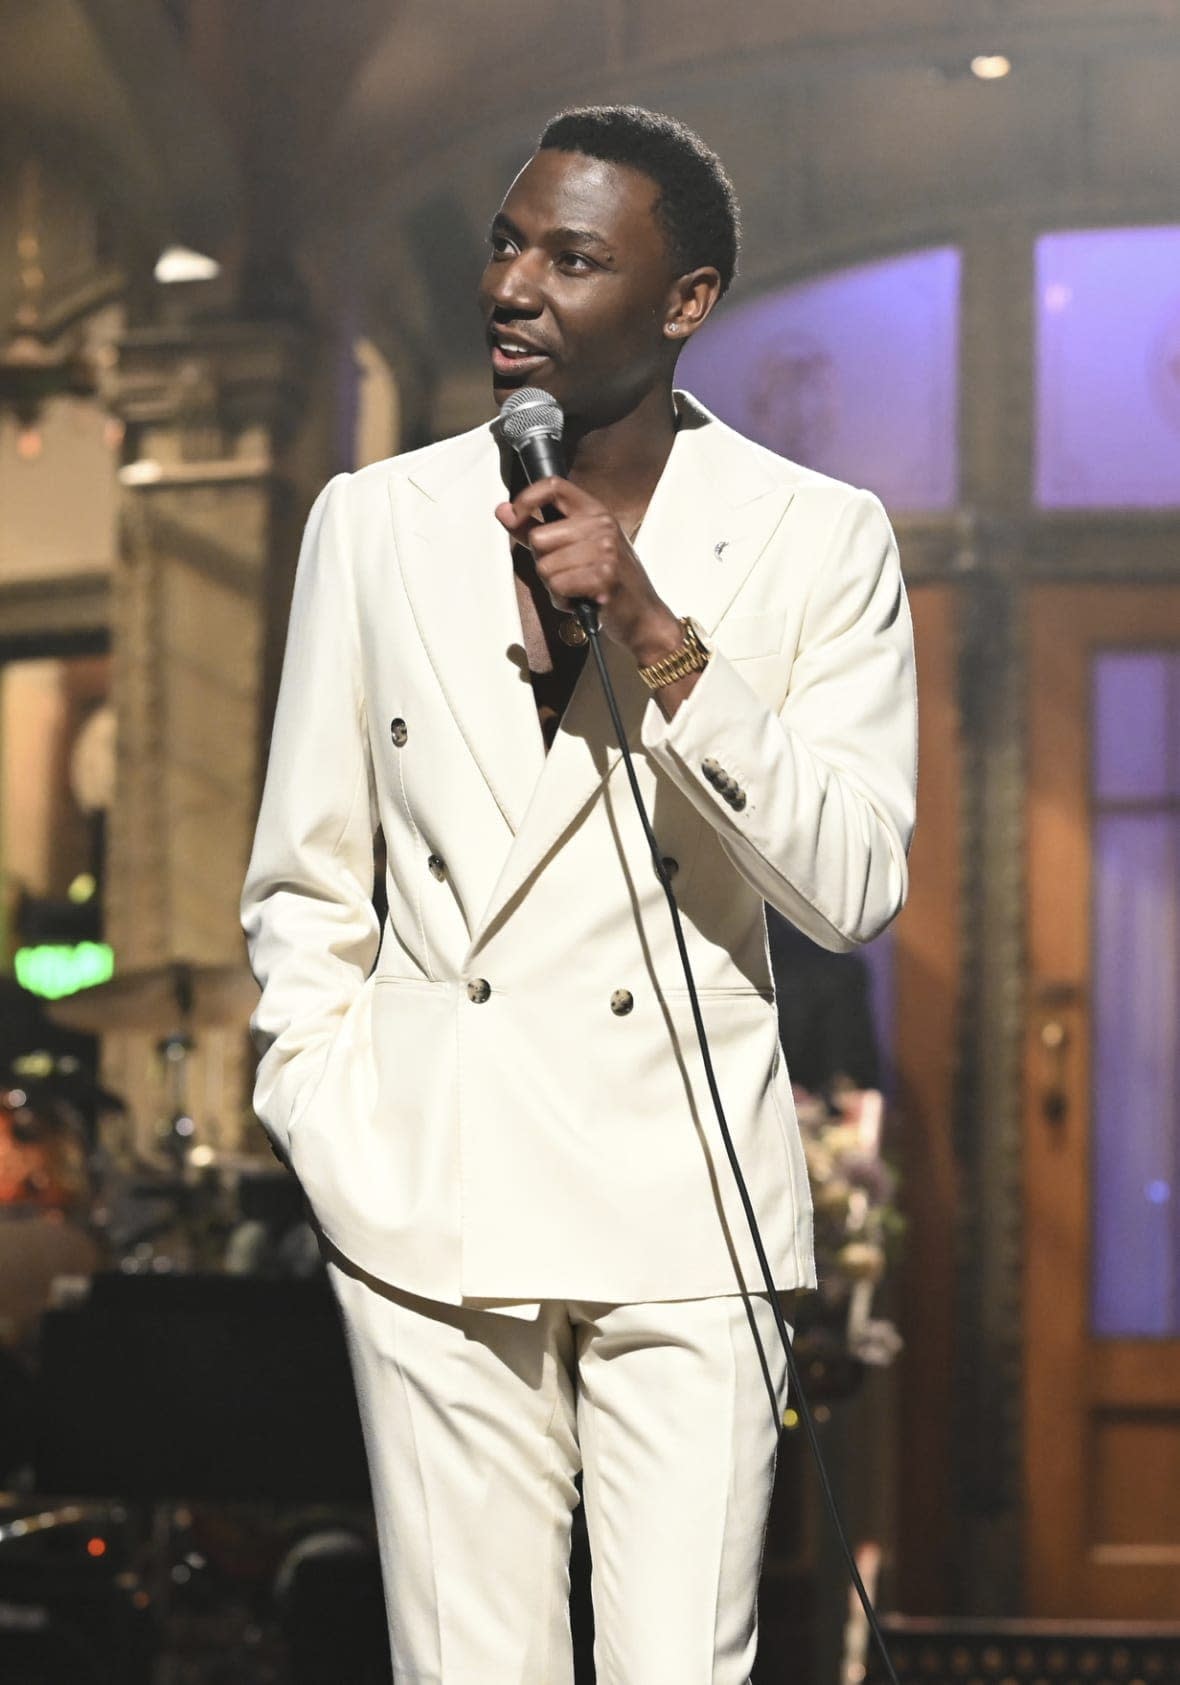 This image released by NBC shows host Jerrod Carmichael during his monologue on “Saturday Night Live.” Carmichael will host the Golden Globe Awards on Tuesday. (Will Heath/NBC via AP)